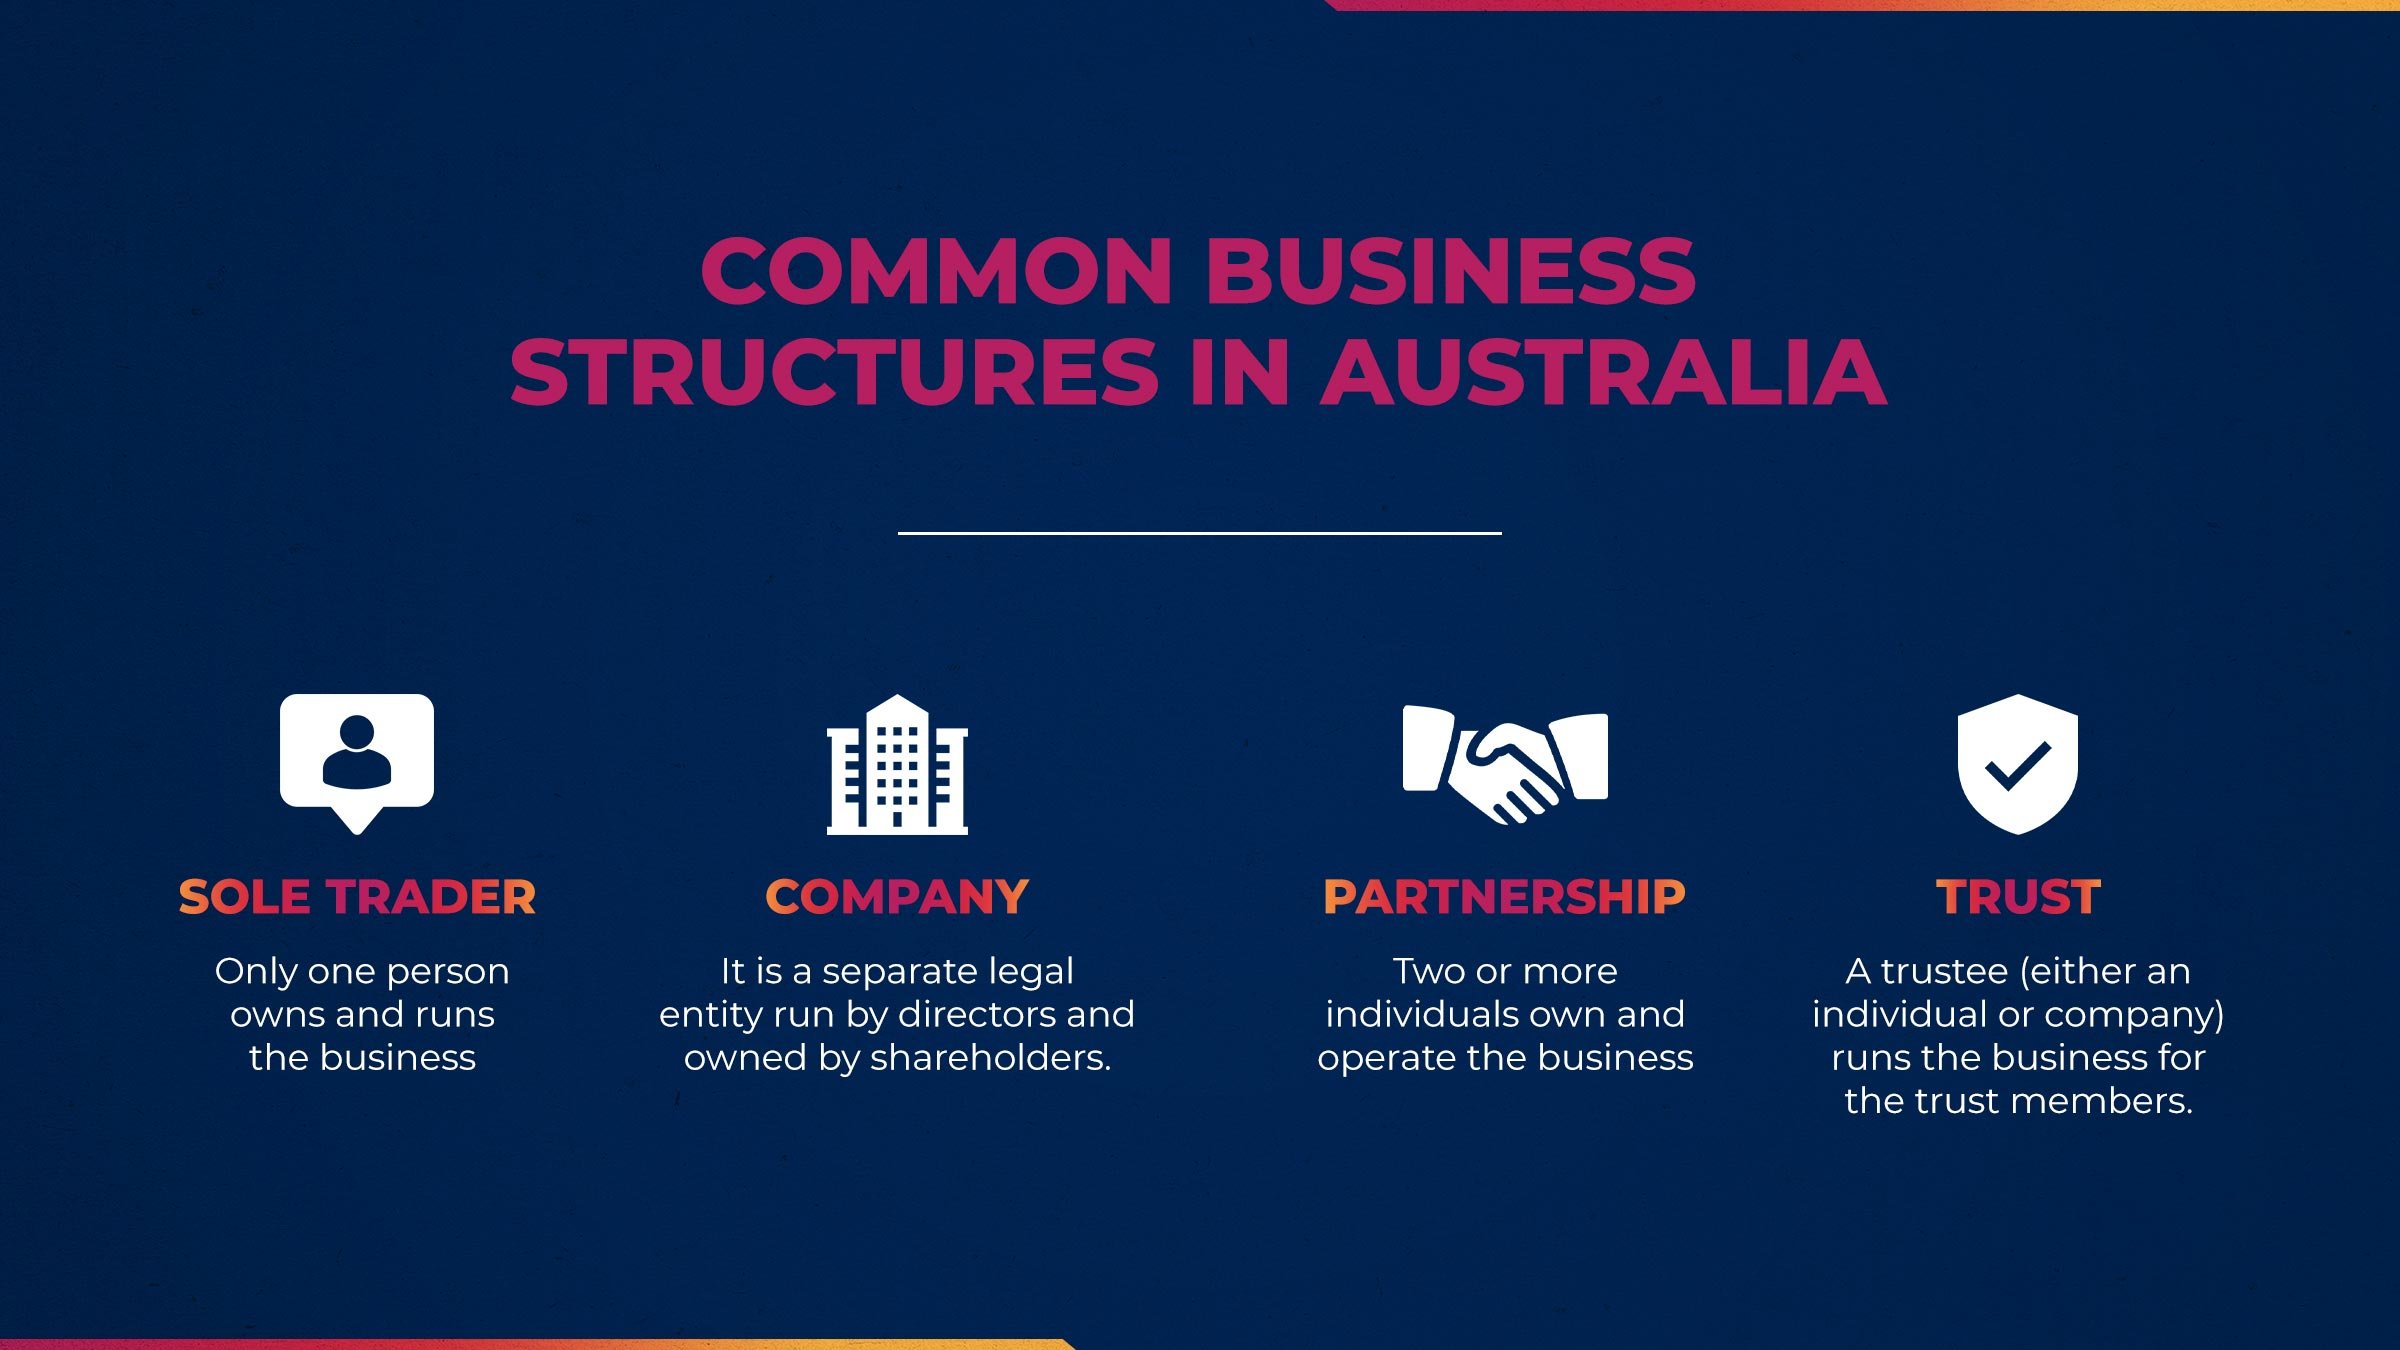 an infographic about the 4 common business structures in Australia including sole trader, company, partnership and trust